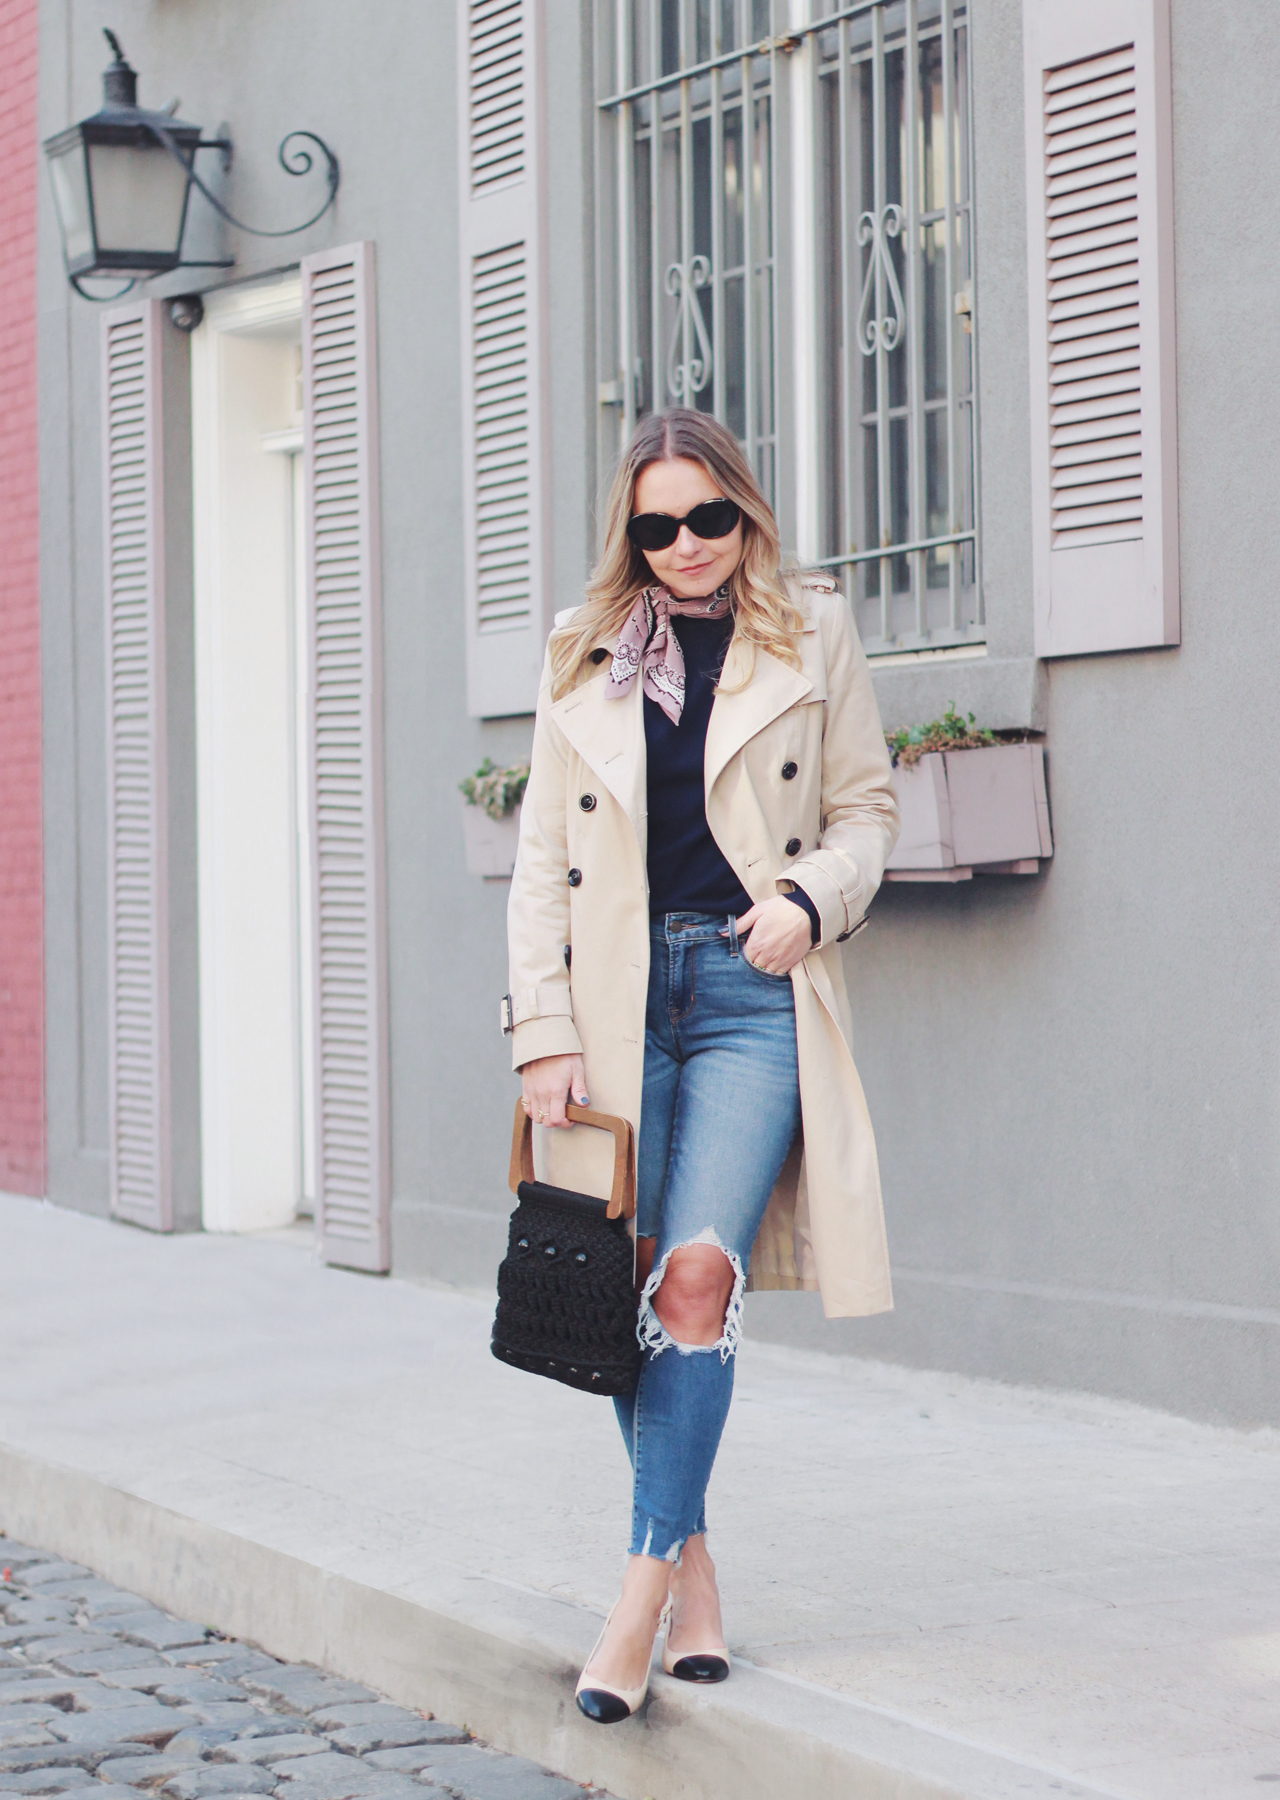 The Steele Maiden: Closet Classics - Trench Coat and Distressed Denim